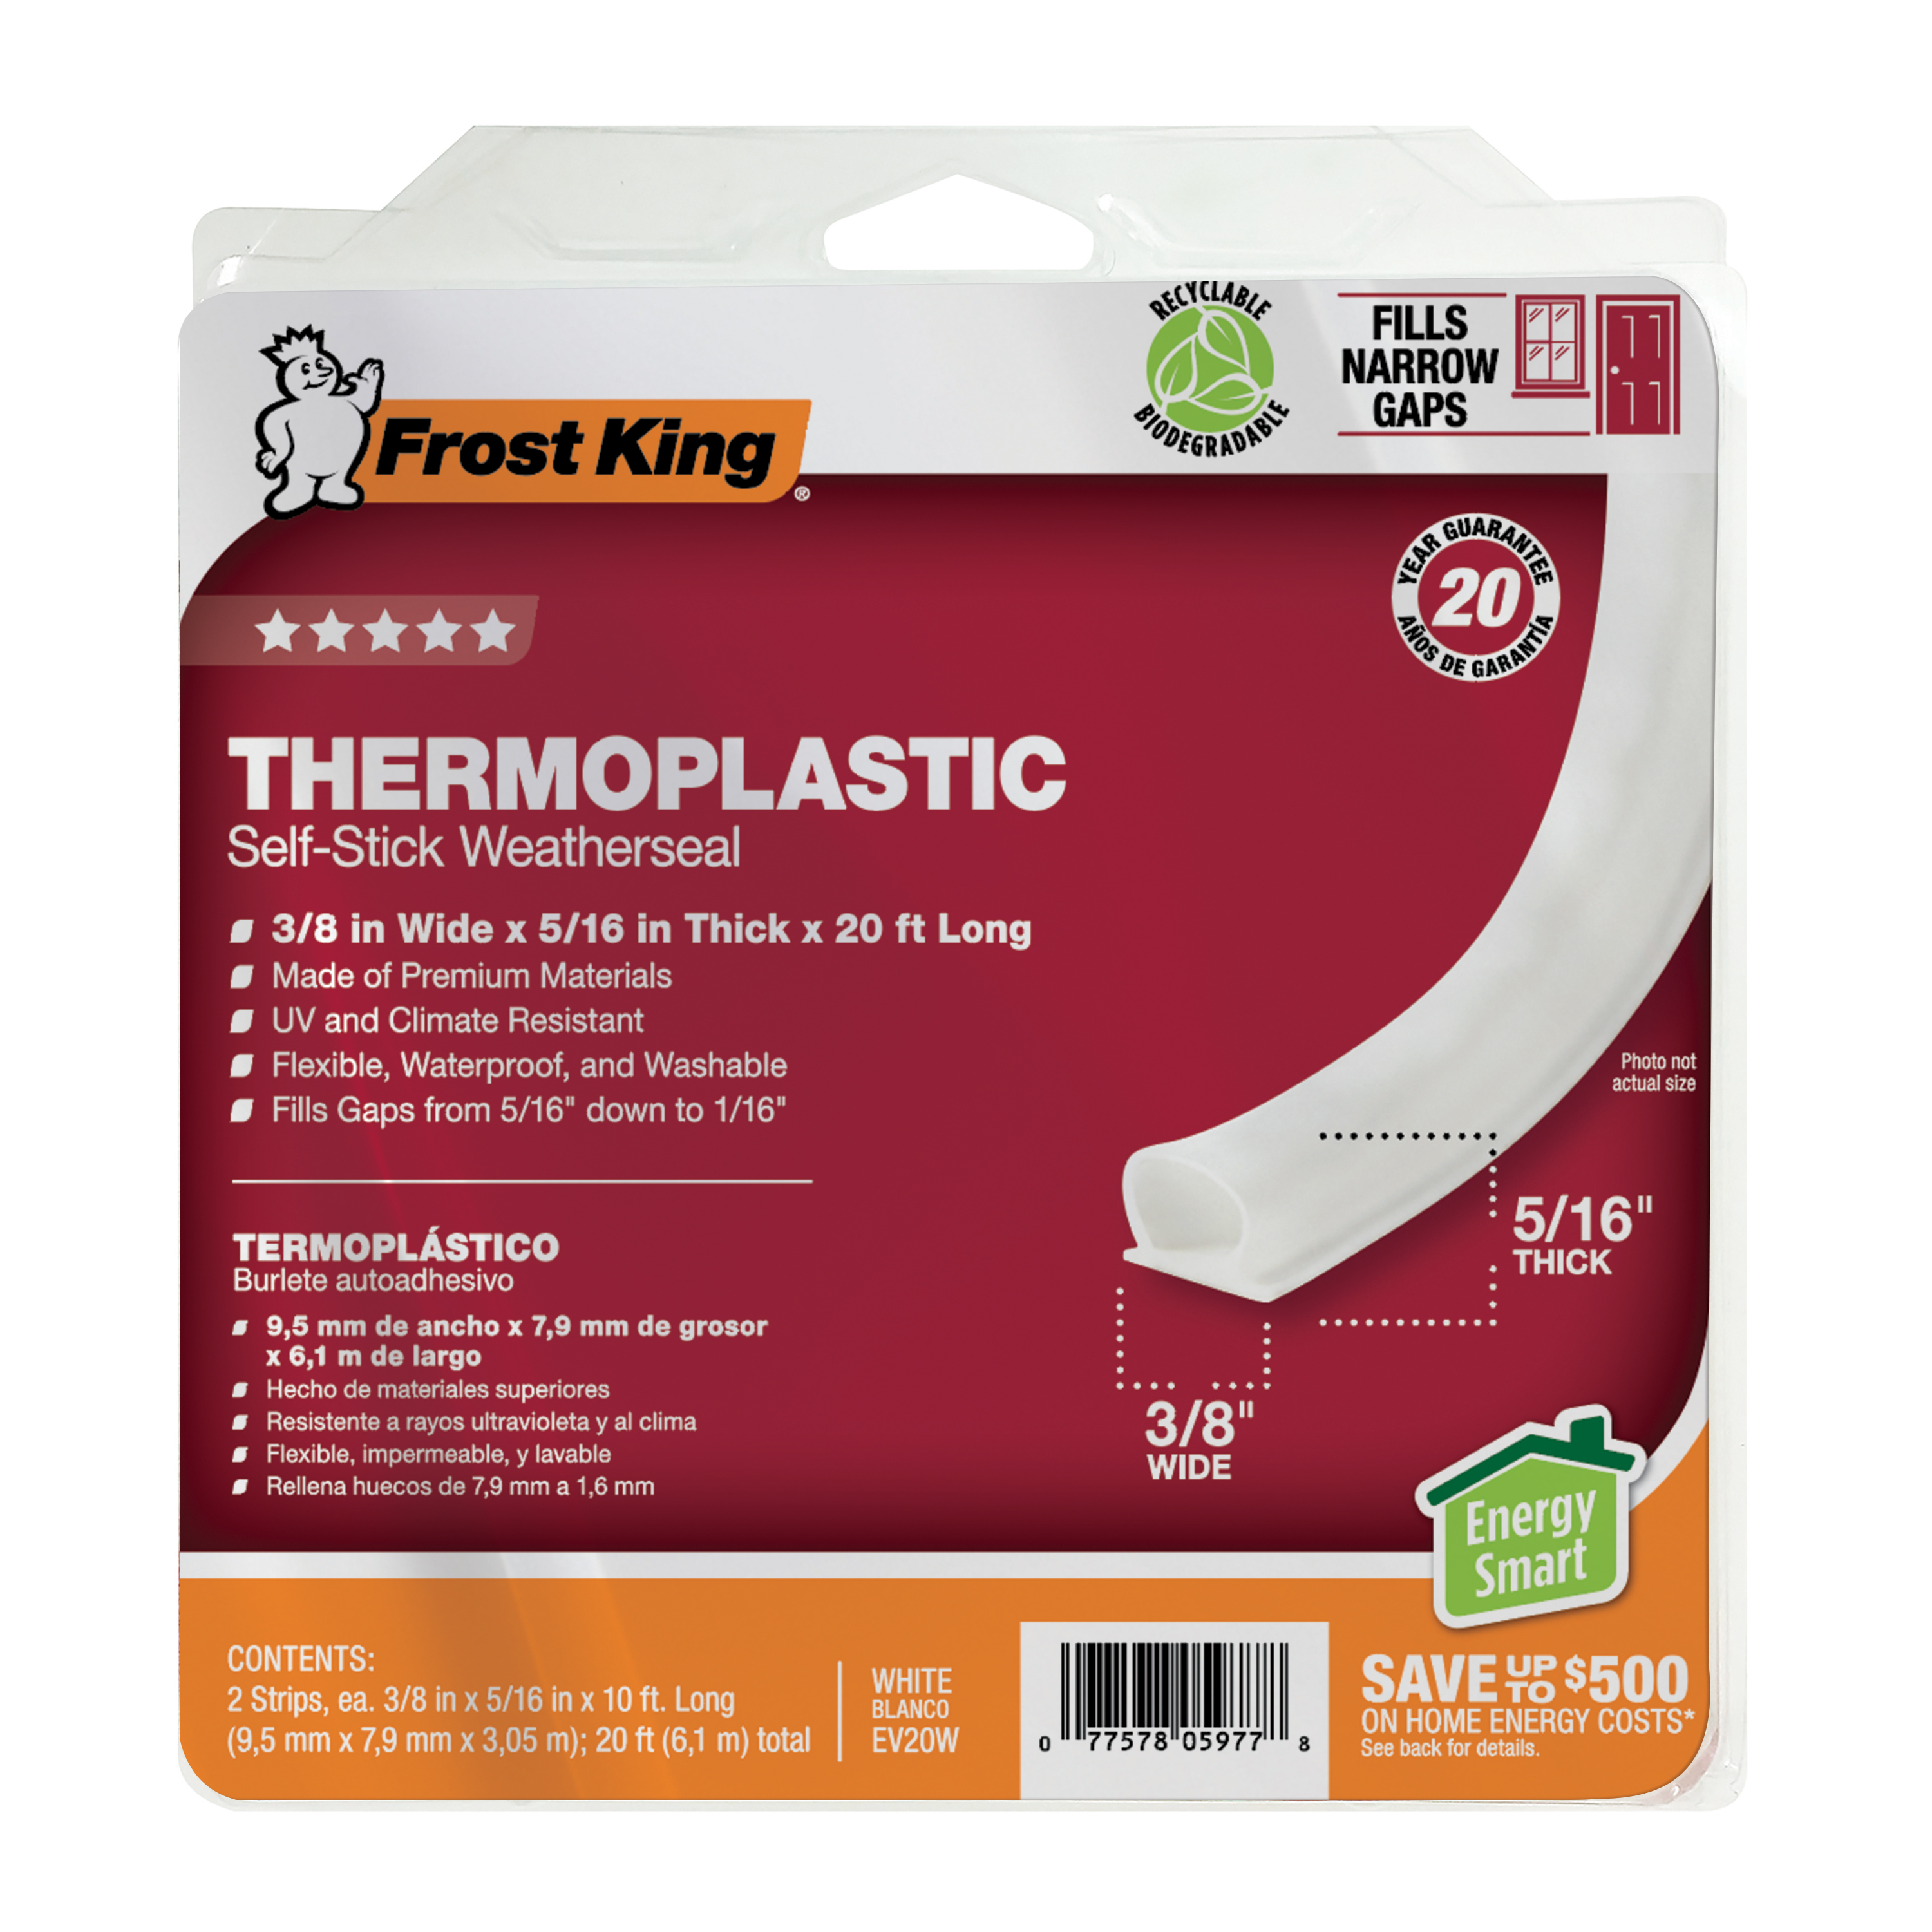 Frost King® EV20W Thermoplastic Rubber Weatherseal, 5/16" X 3/8" X 20', White - image 1 of 8